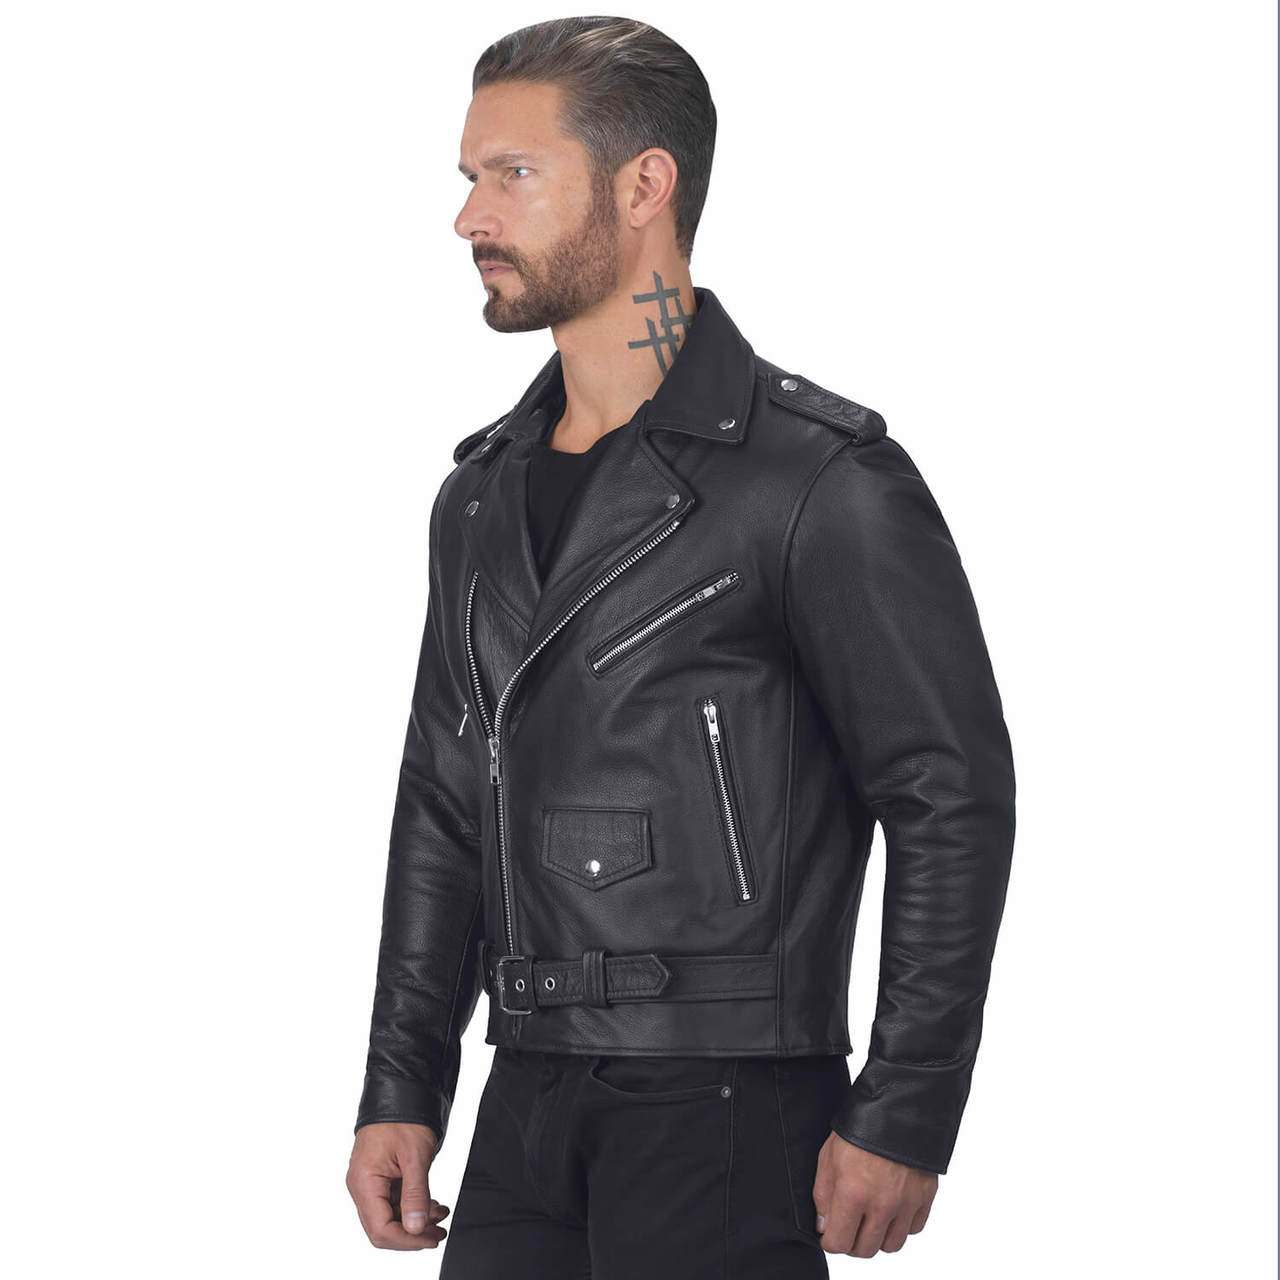 VikingCycle Angel Fire Motorcycle Jacket for Men - Motorcycle House ...